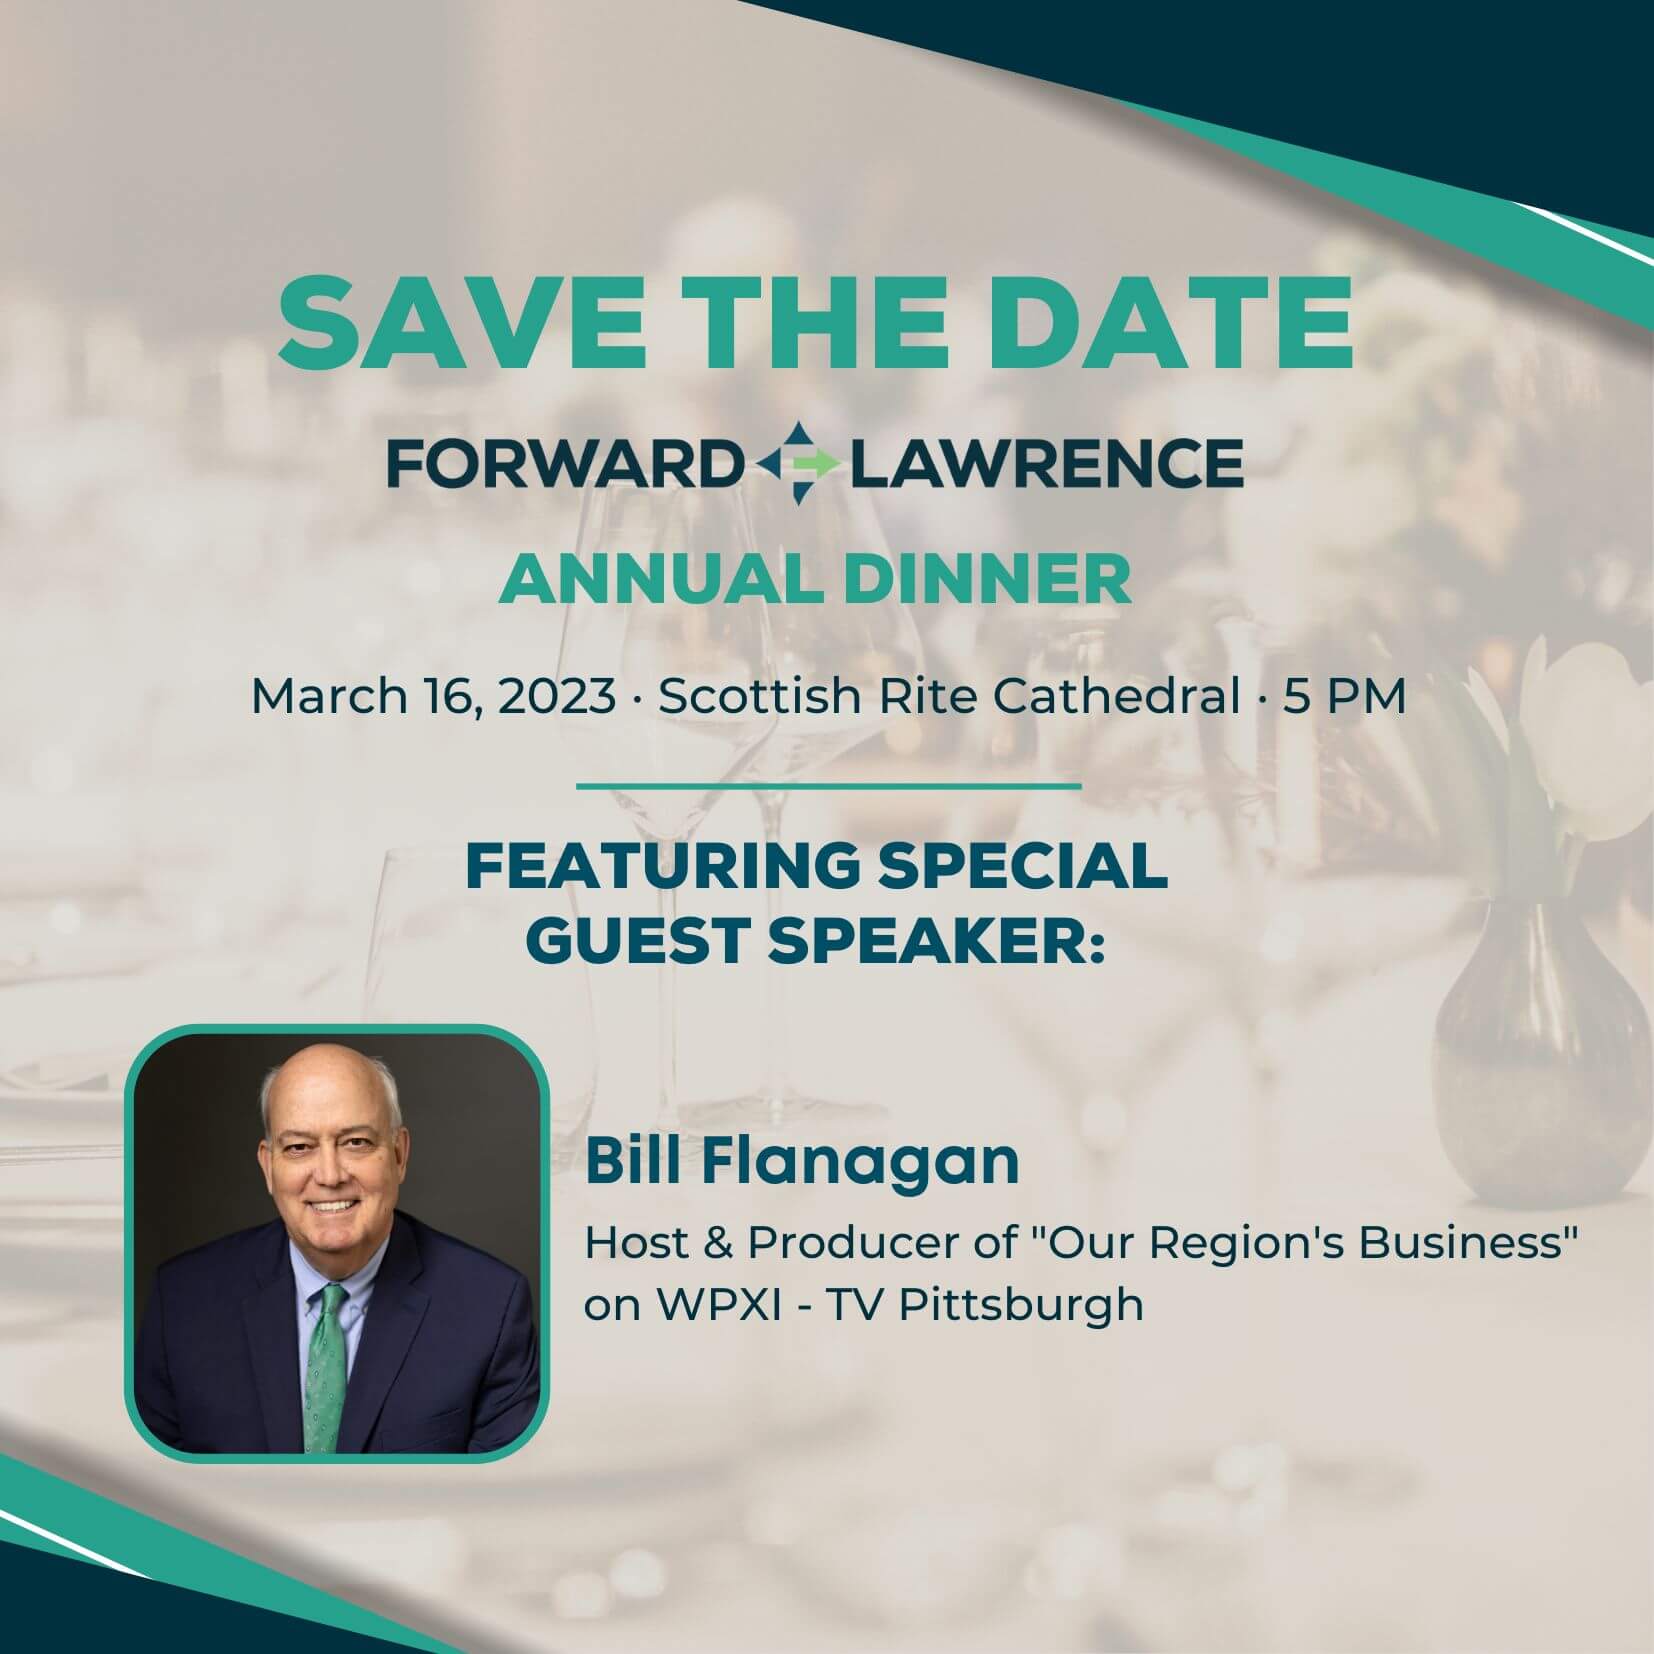 Annual Dinner Save The Date